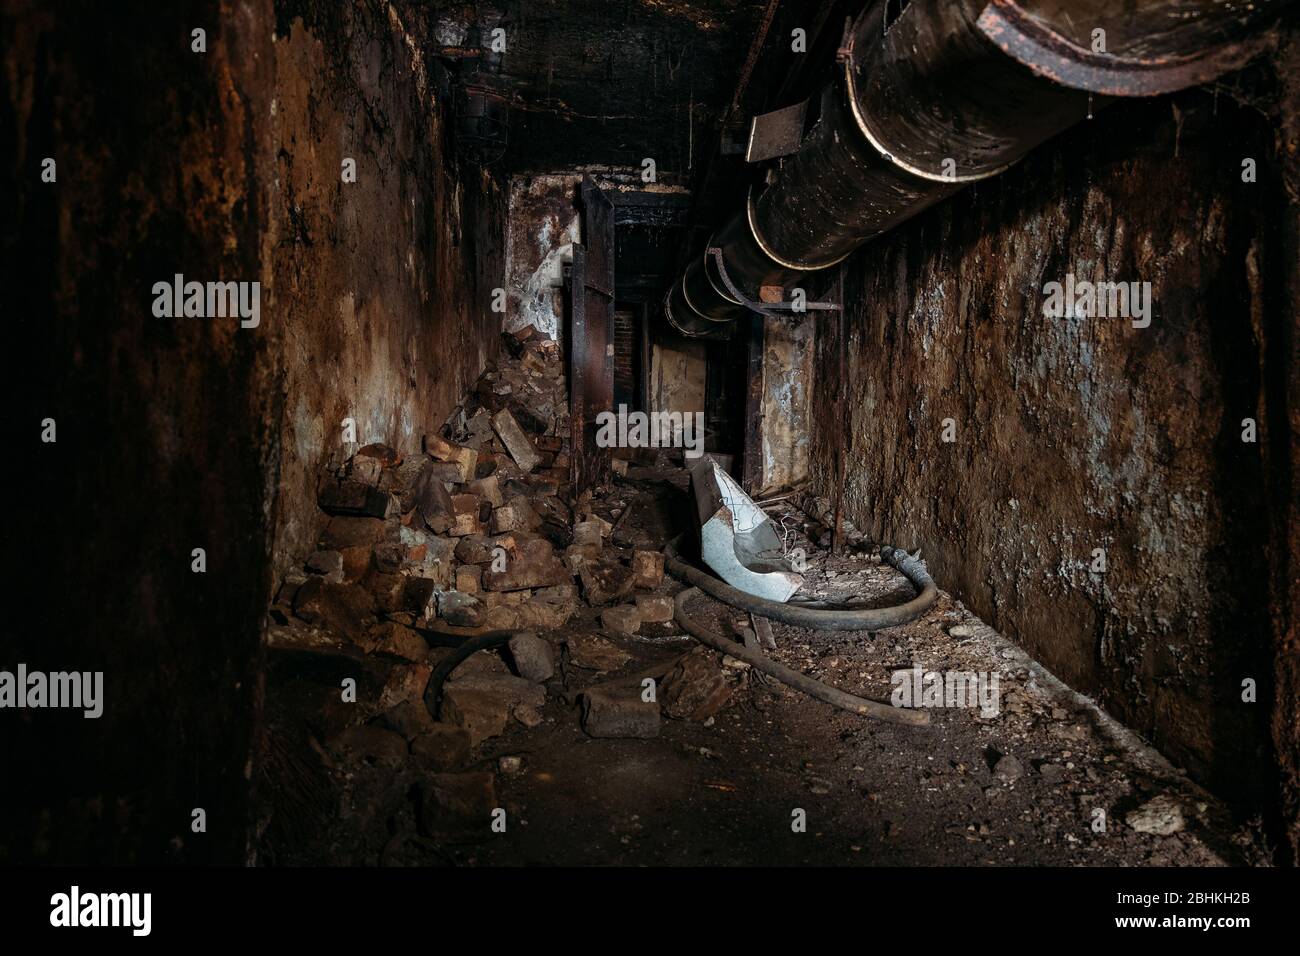 Burnt interior of industrial building basement. Walls in black soot after fire. Stock Photo